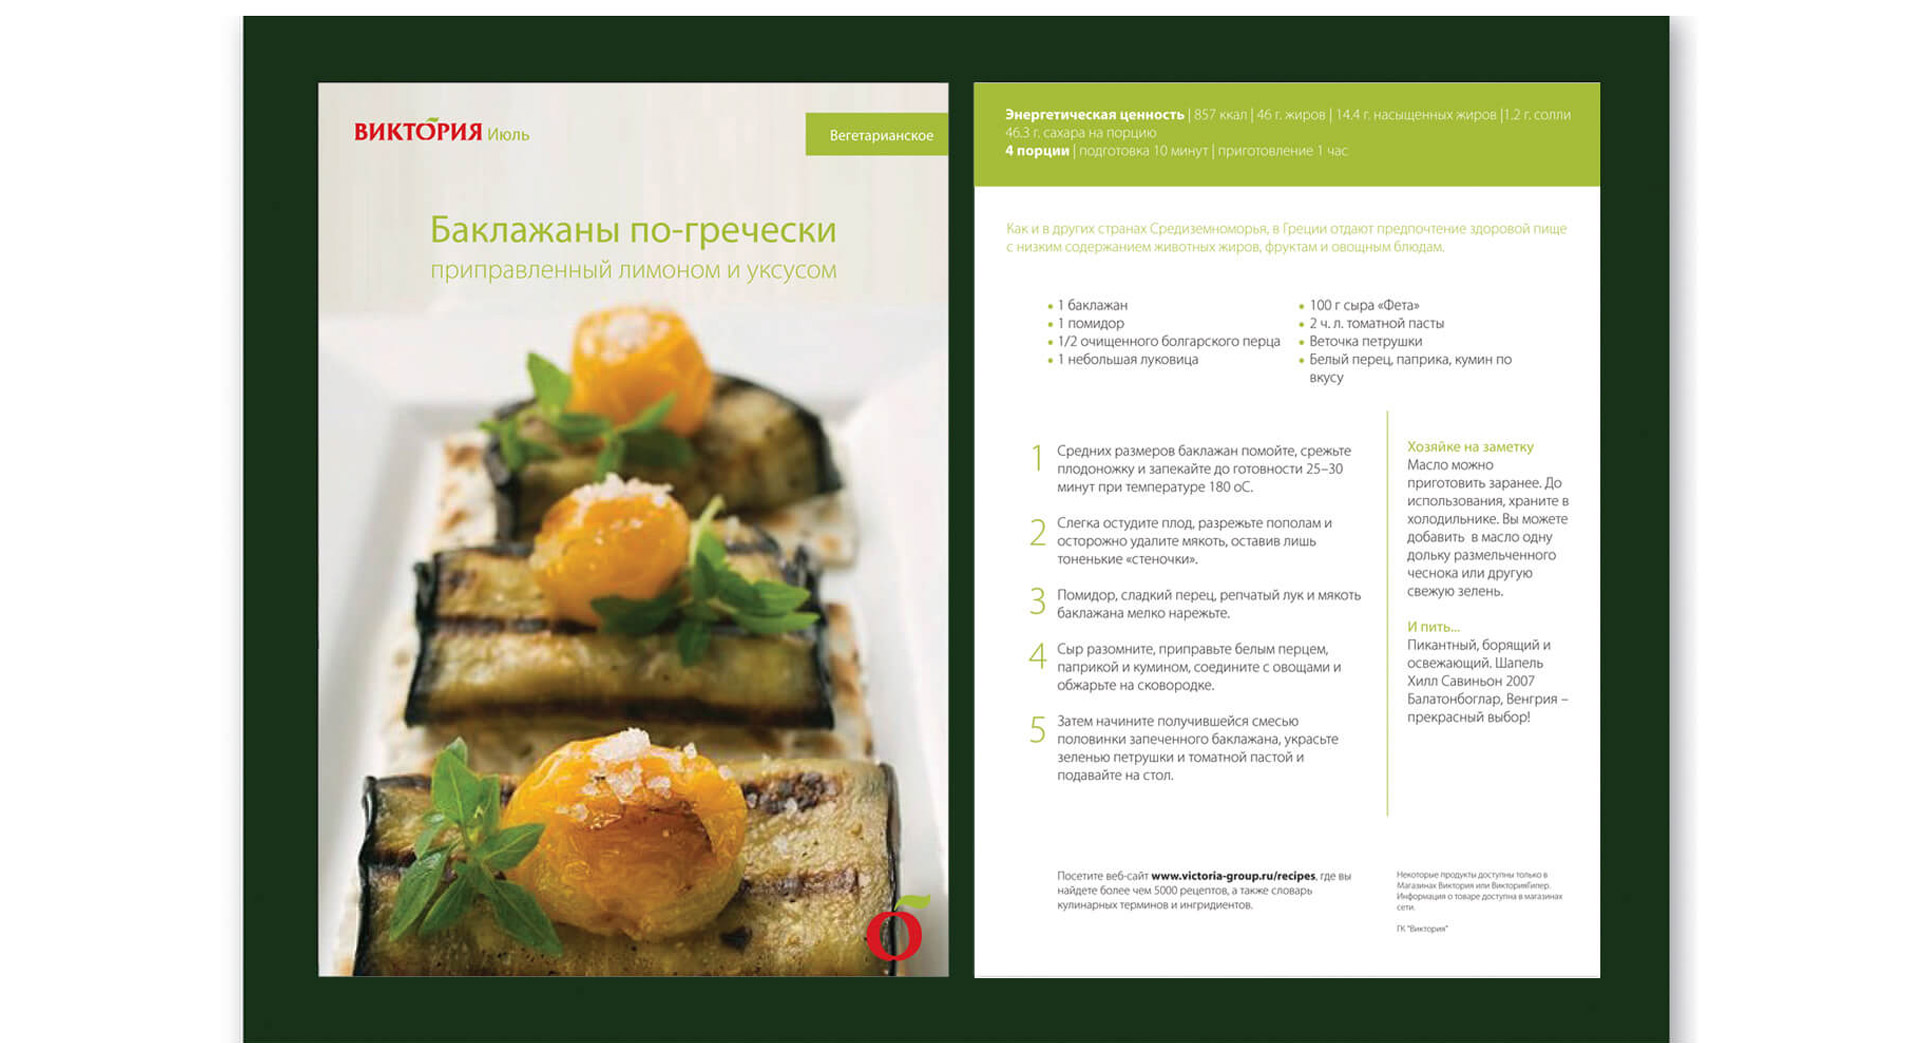 Victoria supermarkets Russia in-store brand communications and marketing material